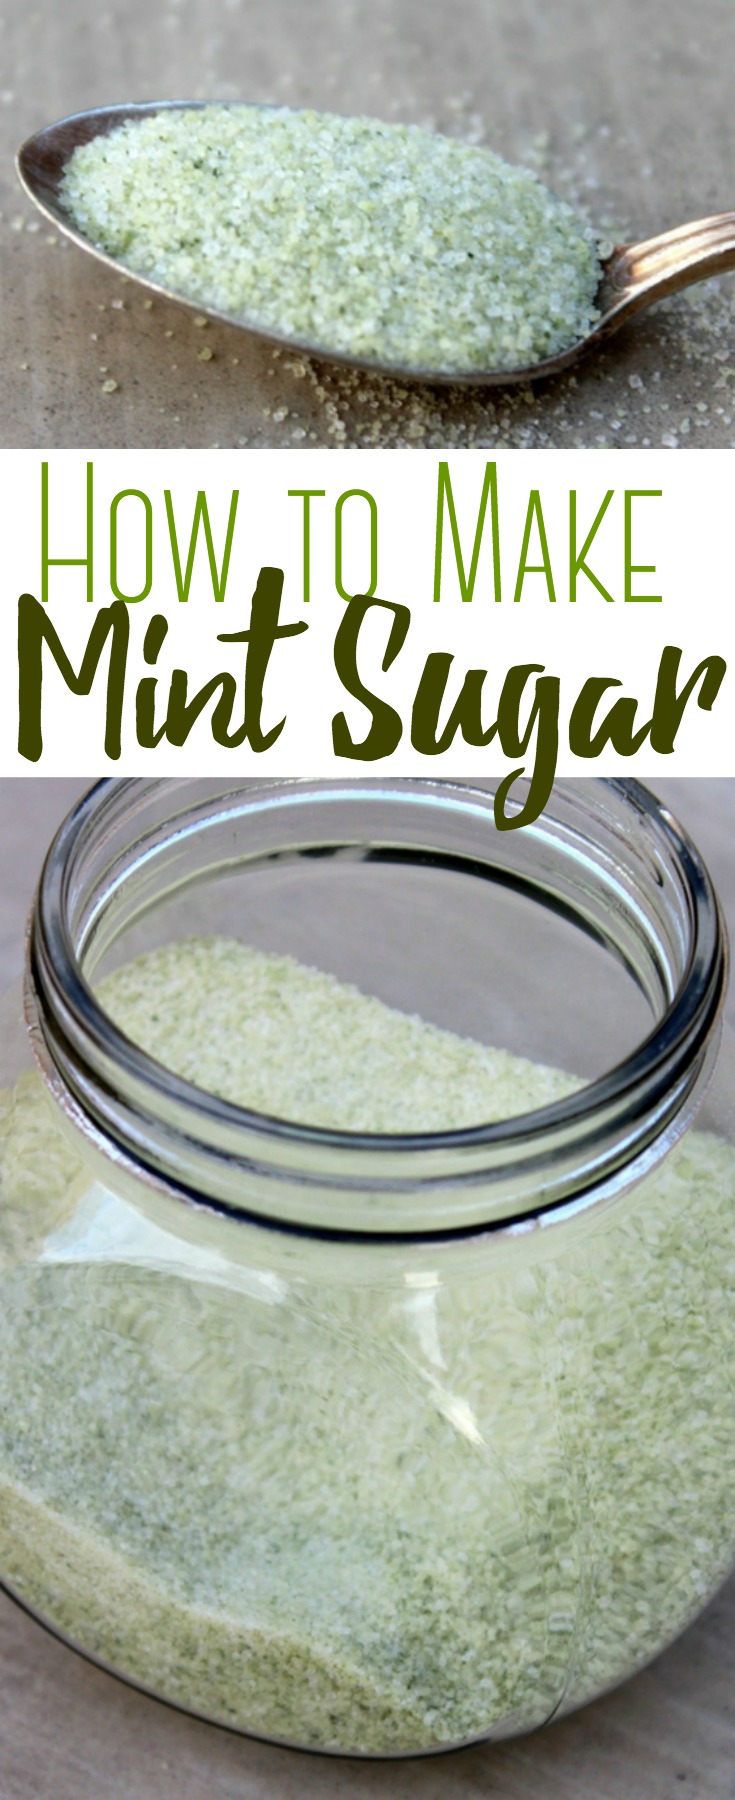 Learn how to make mint sugar with fresh mint! This delicious mint sugar comes together in just minutes with just two simple ingredients! #mintsugar #mint #herbs #sugar #gardening #foodpreservation